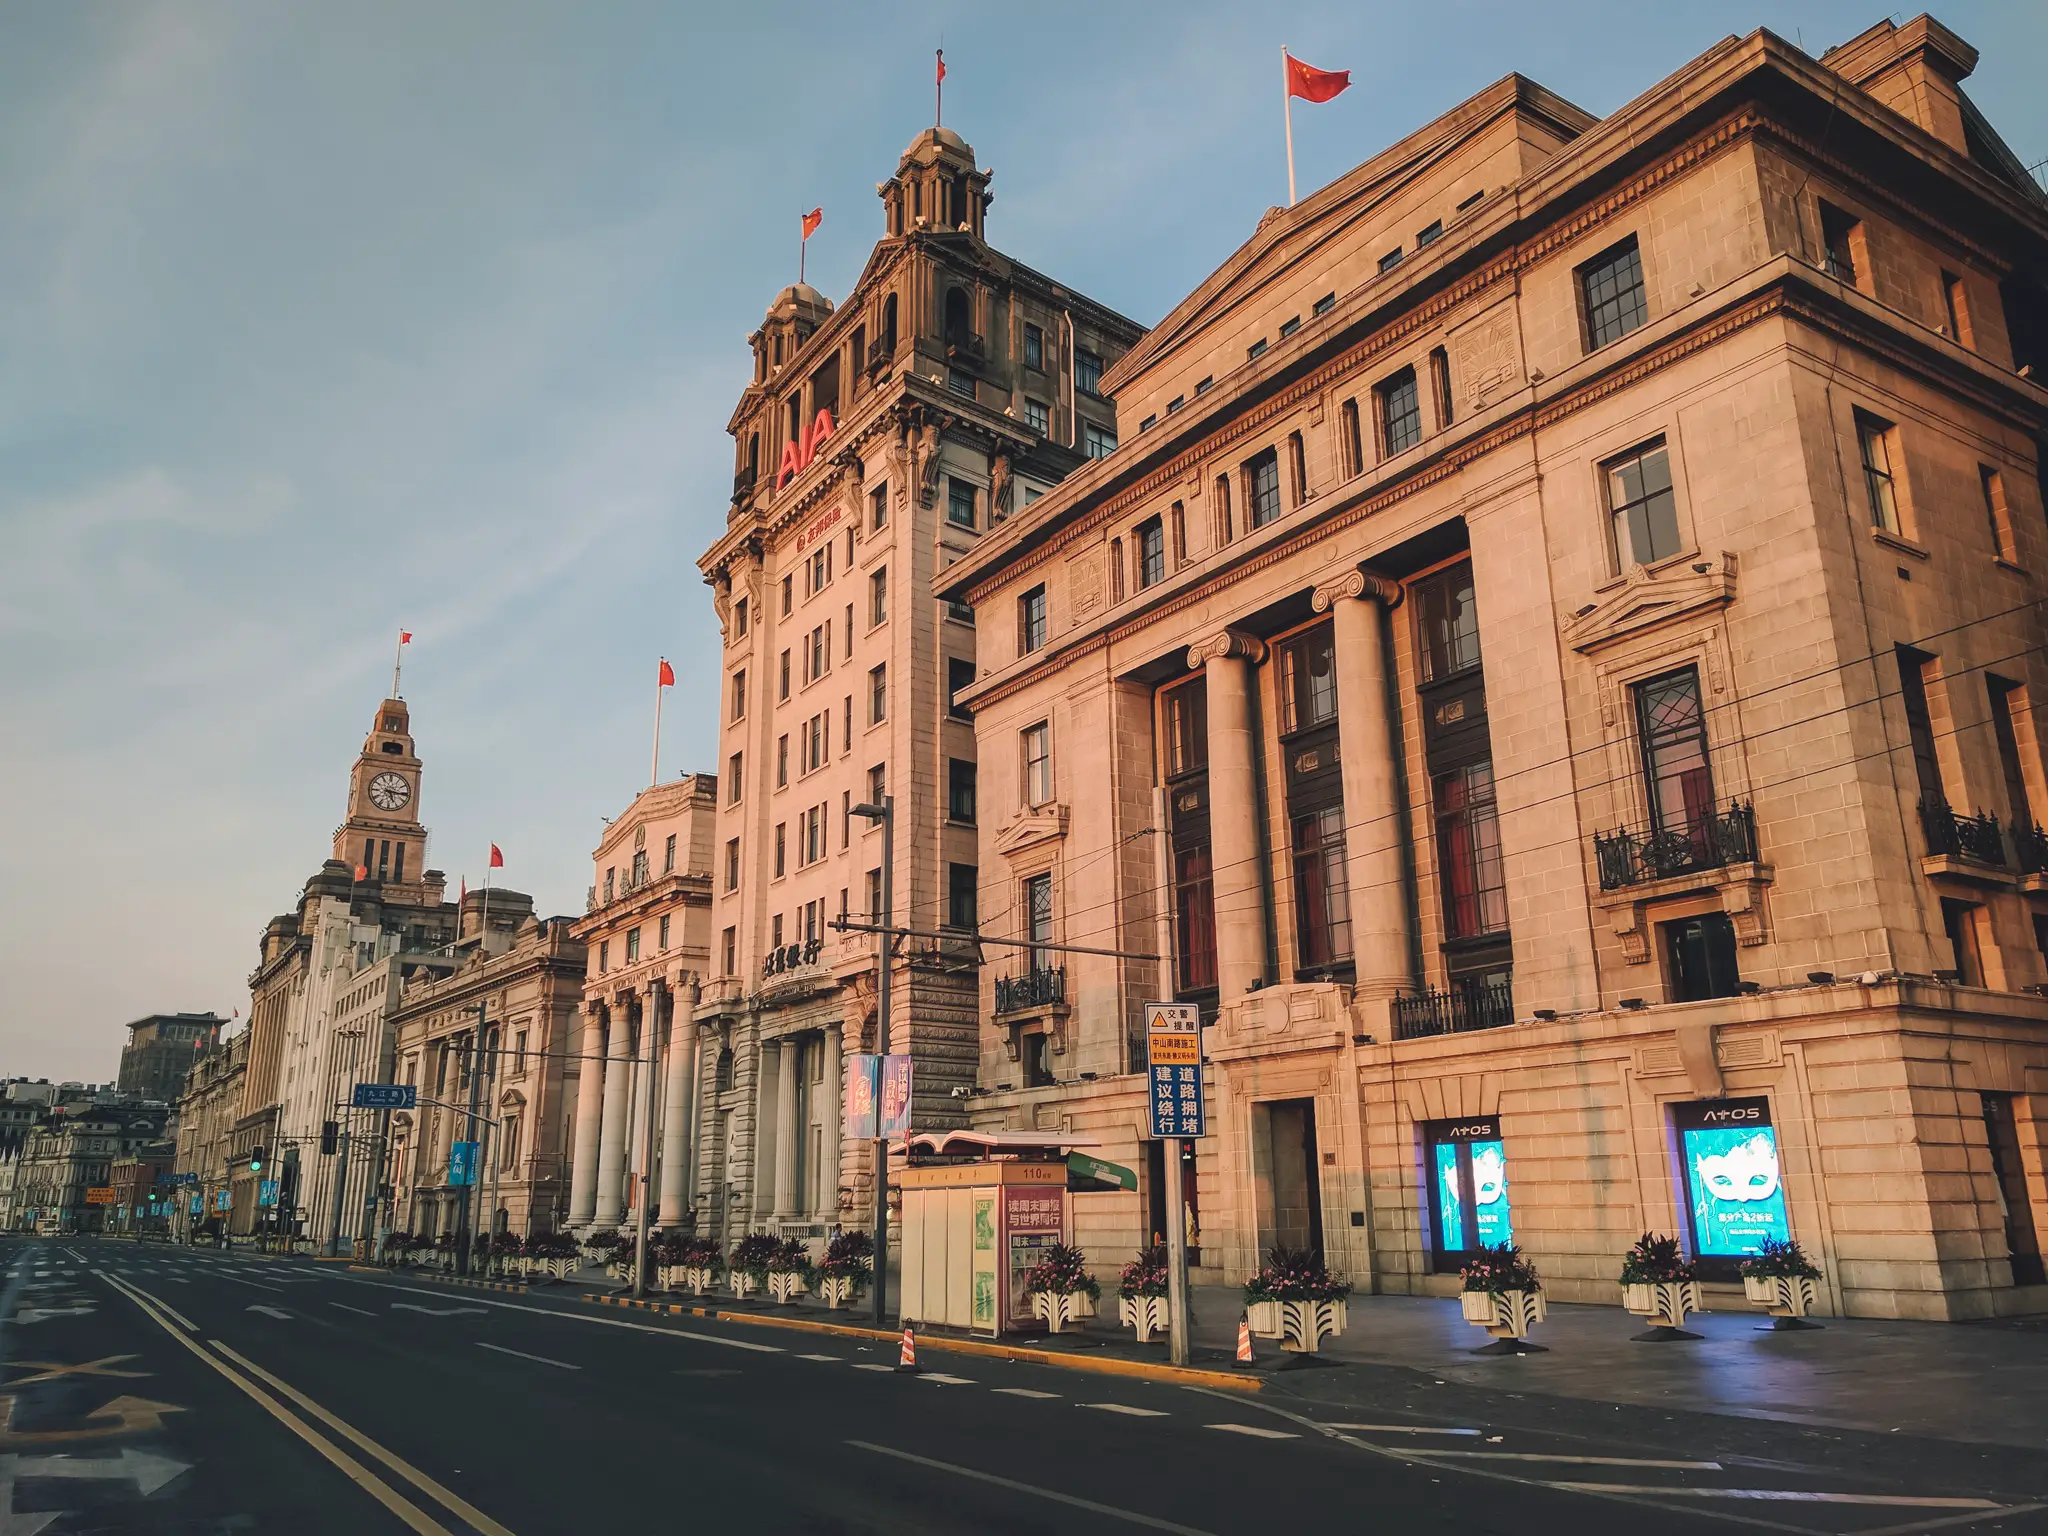 Pretty sunset along the the Bund in Shanghai